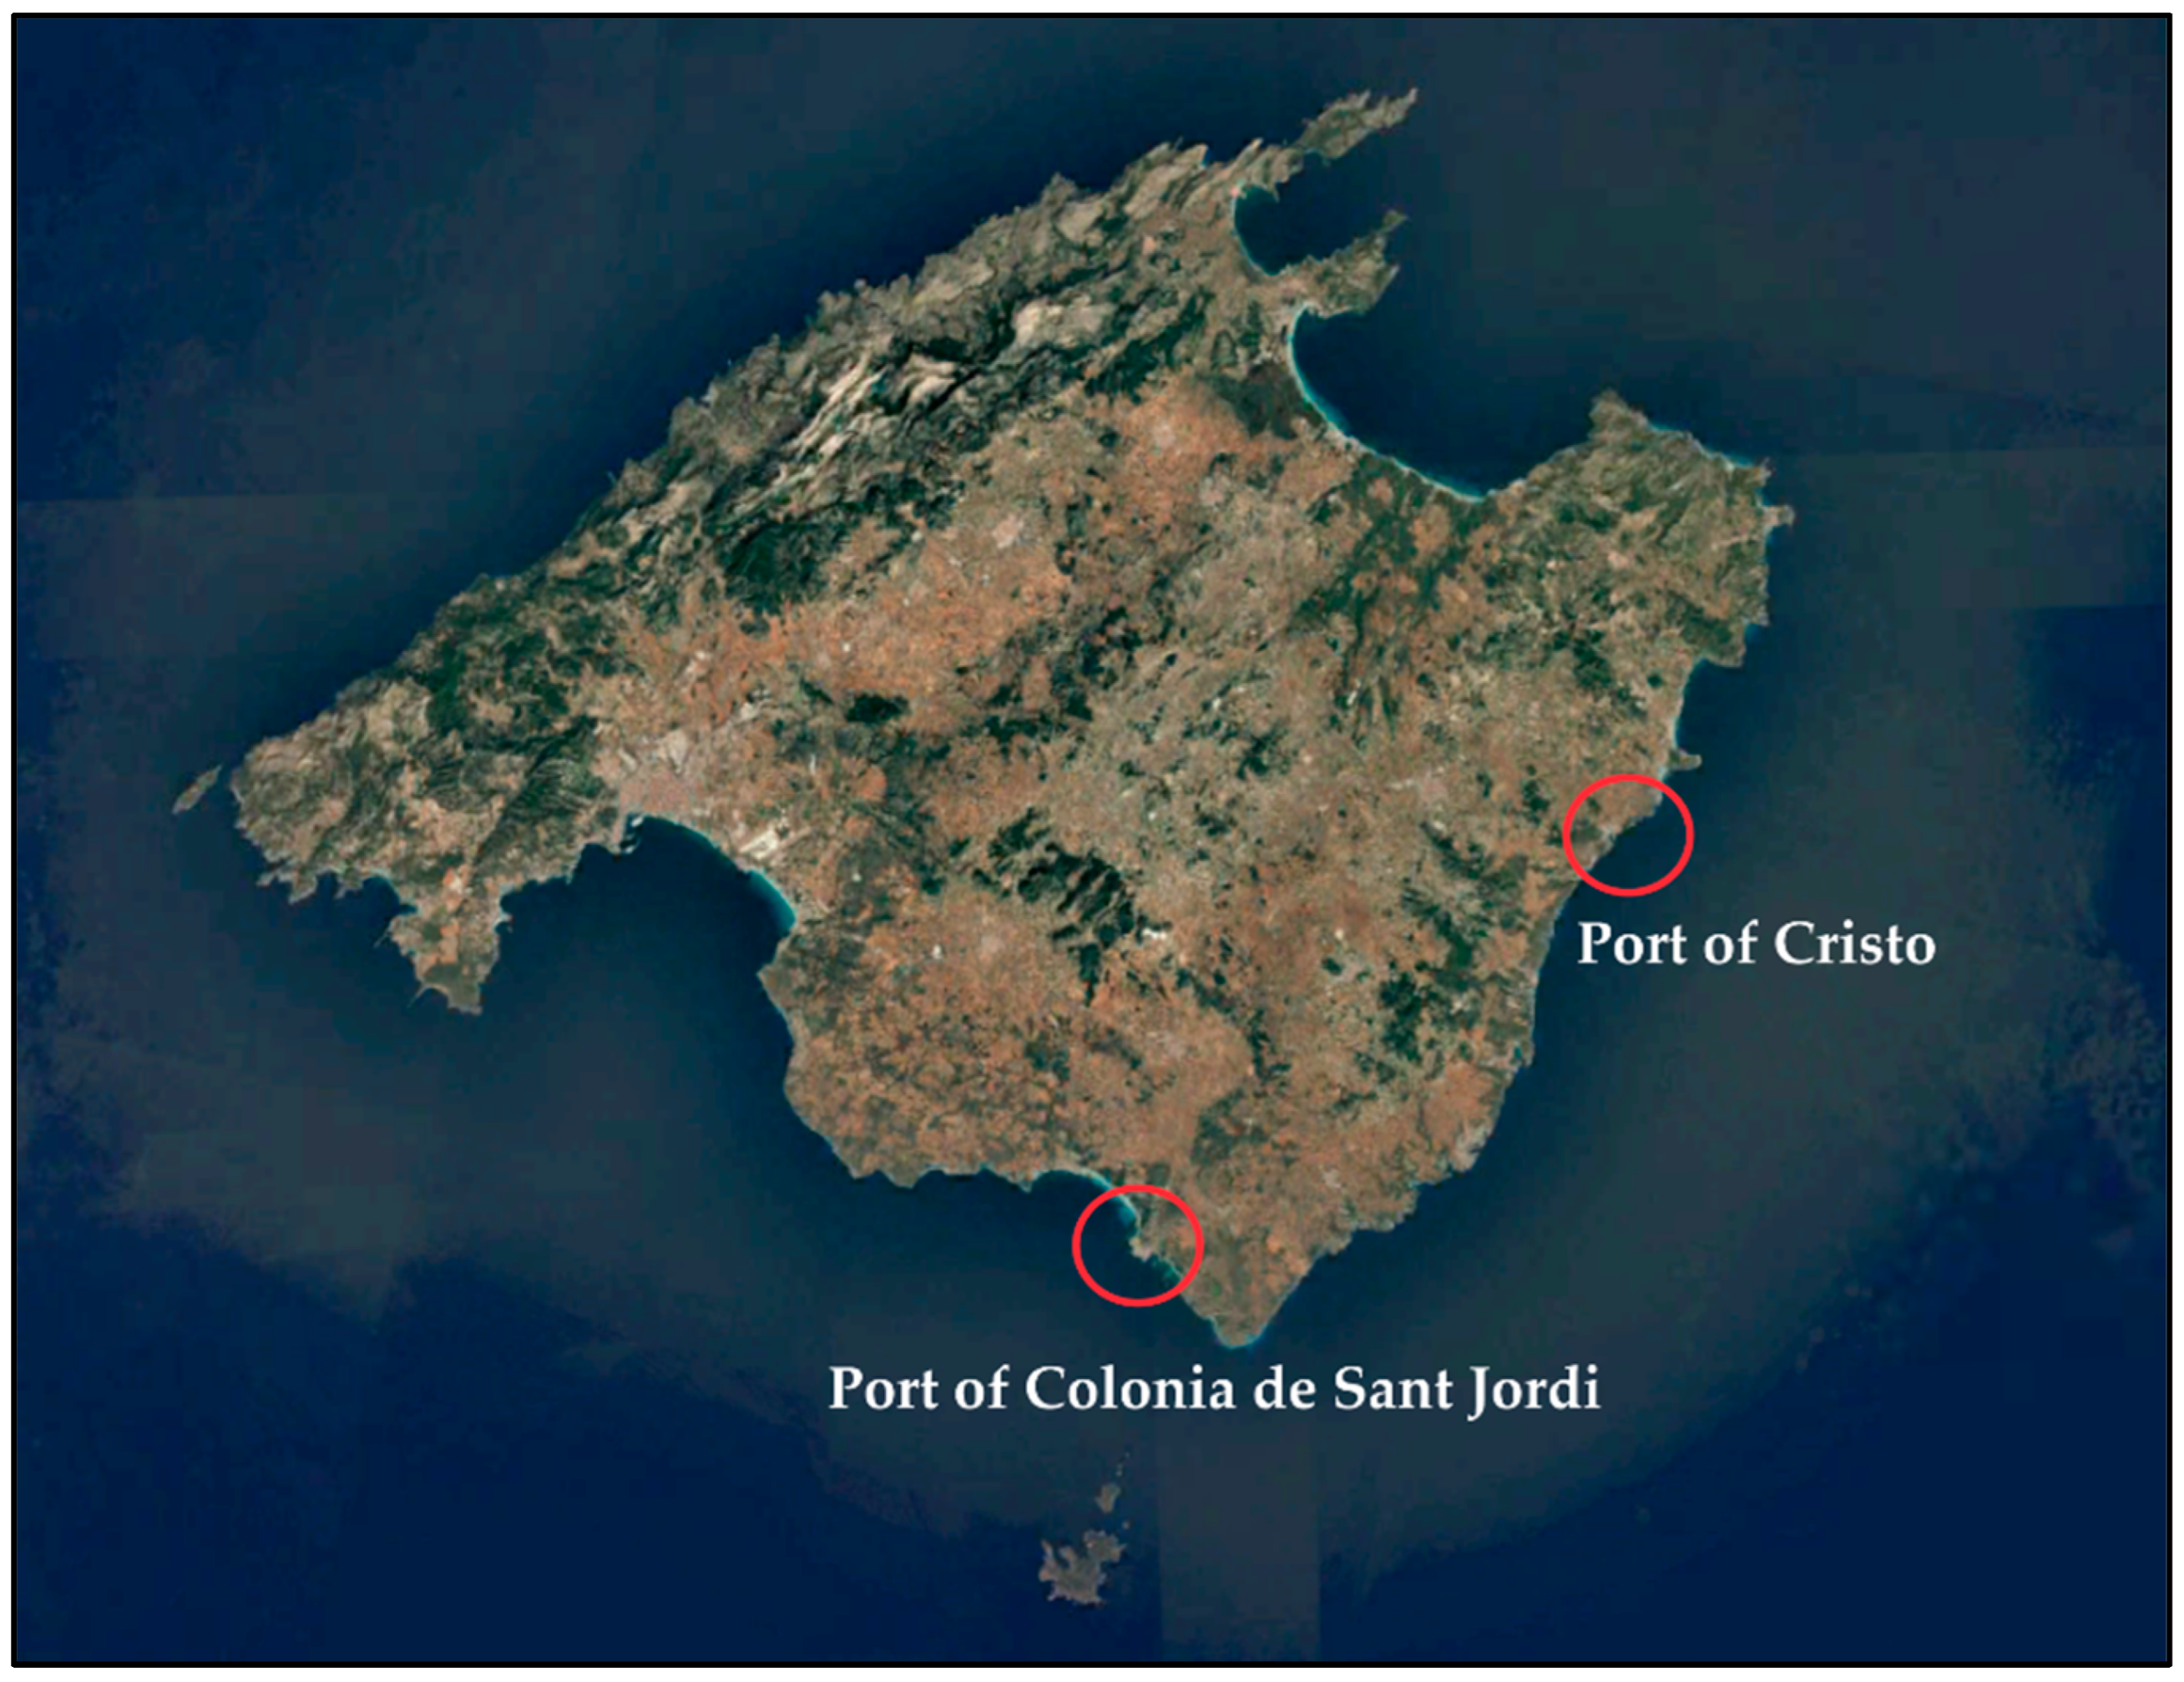 JMSE | Free Full-Text | Composition of Floating Marine Litter in Port Areas  of the Island of Mallorca | HTML